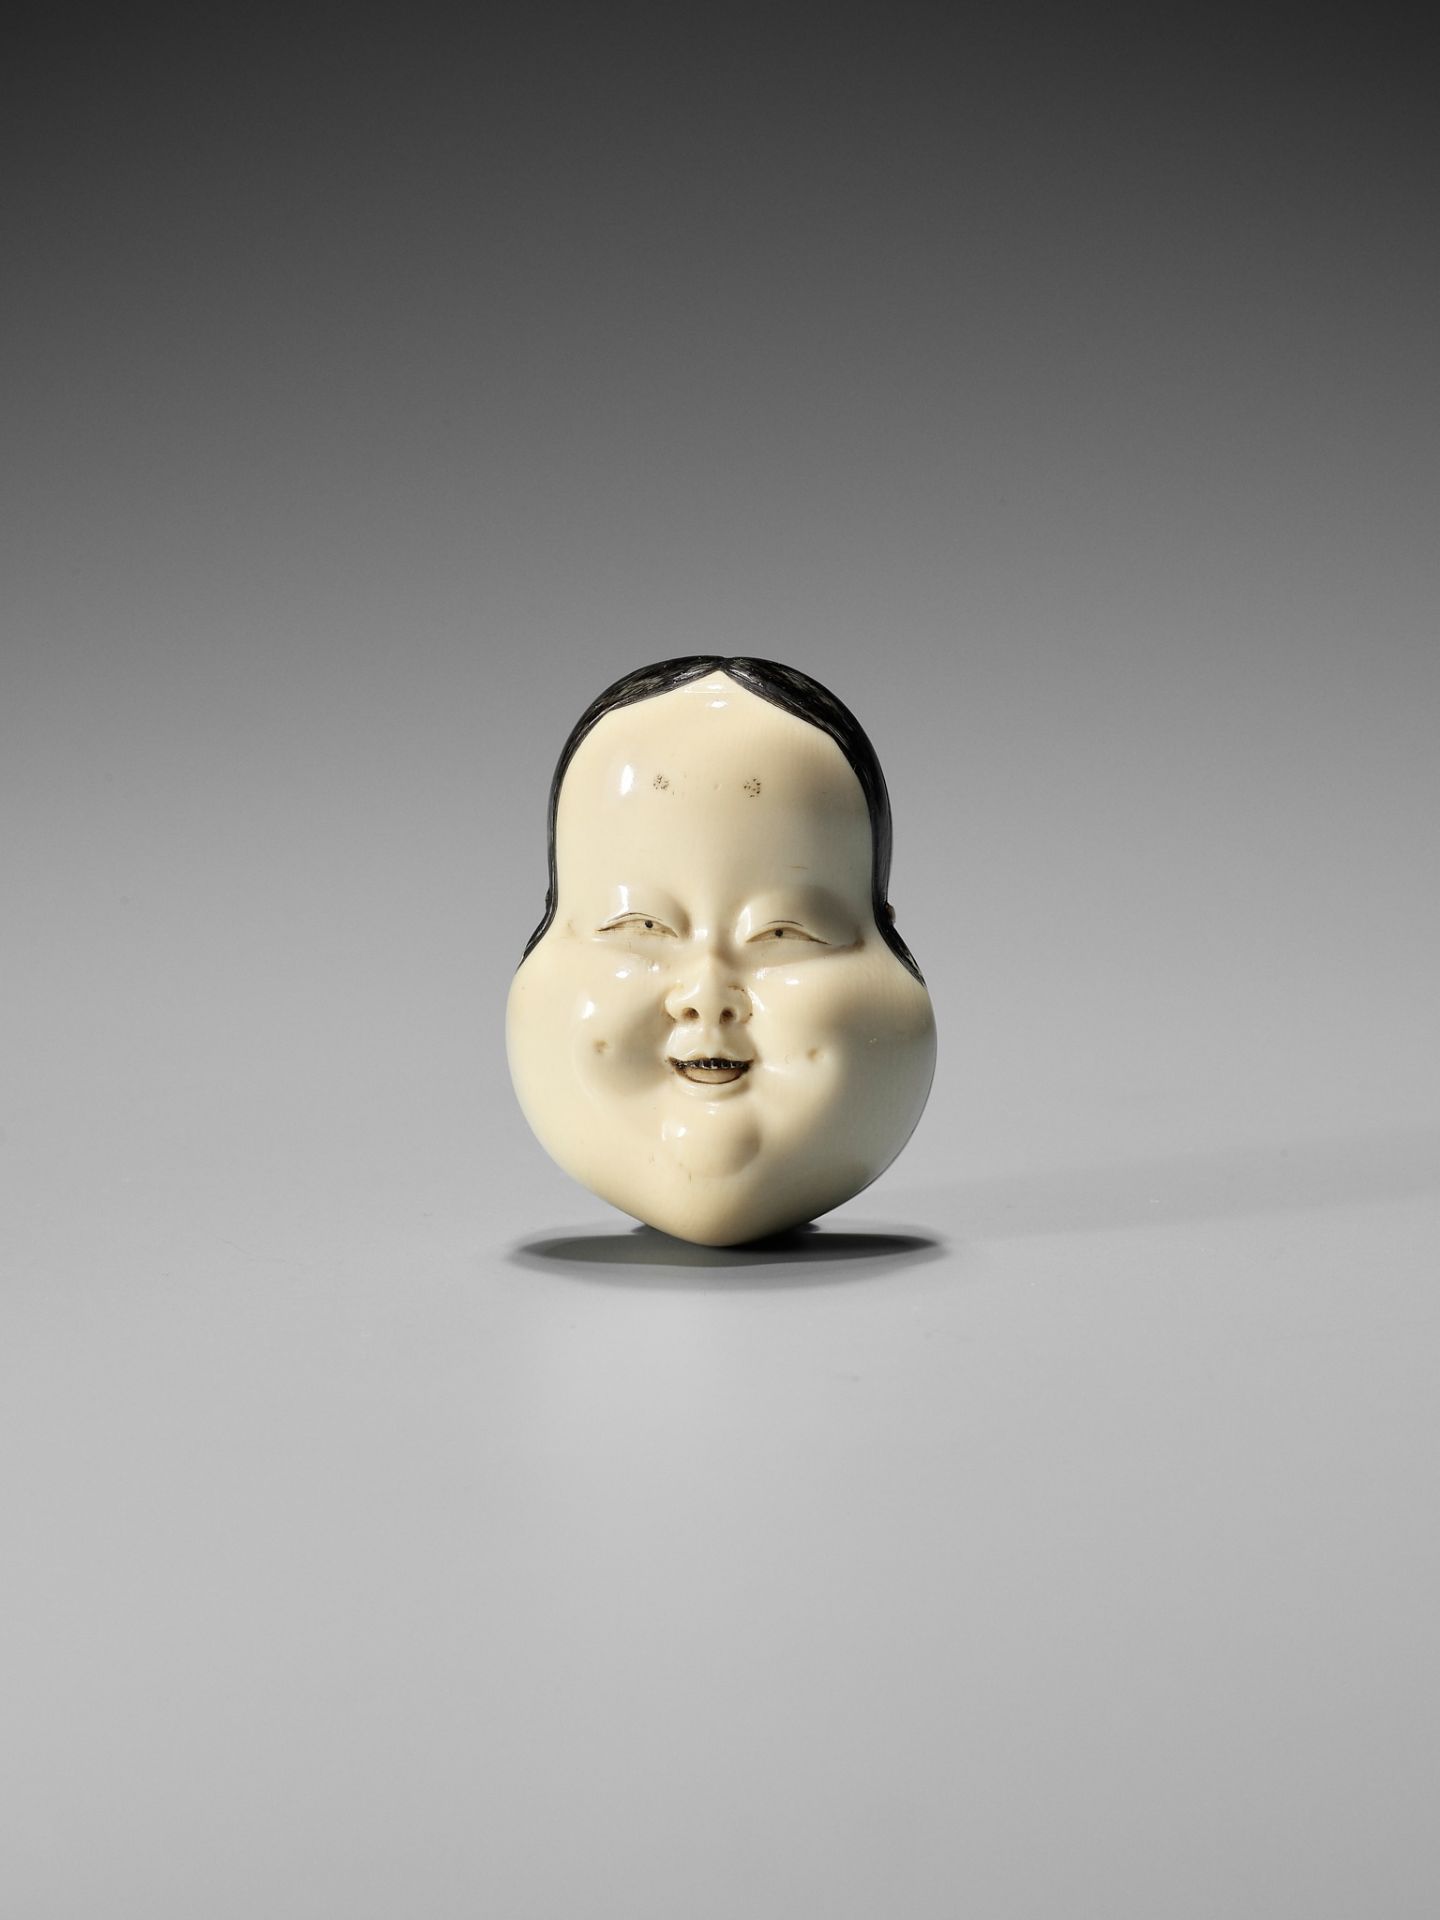 YOZEI: A RARE LACQUERED IVORY HAKO (BOX) AND COVER IN THE FORM OF AN OKAME MASK, DATED 1705 - Image 2 of 10